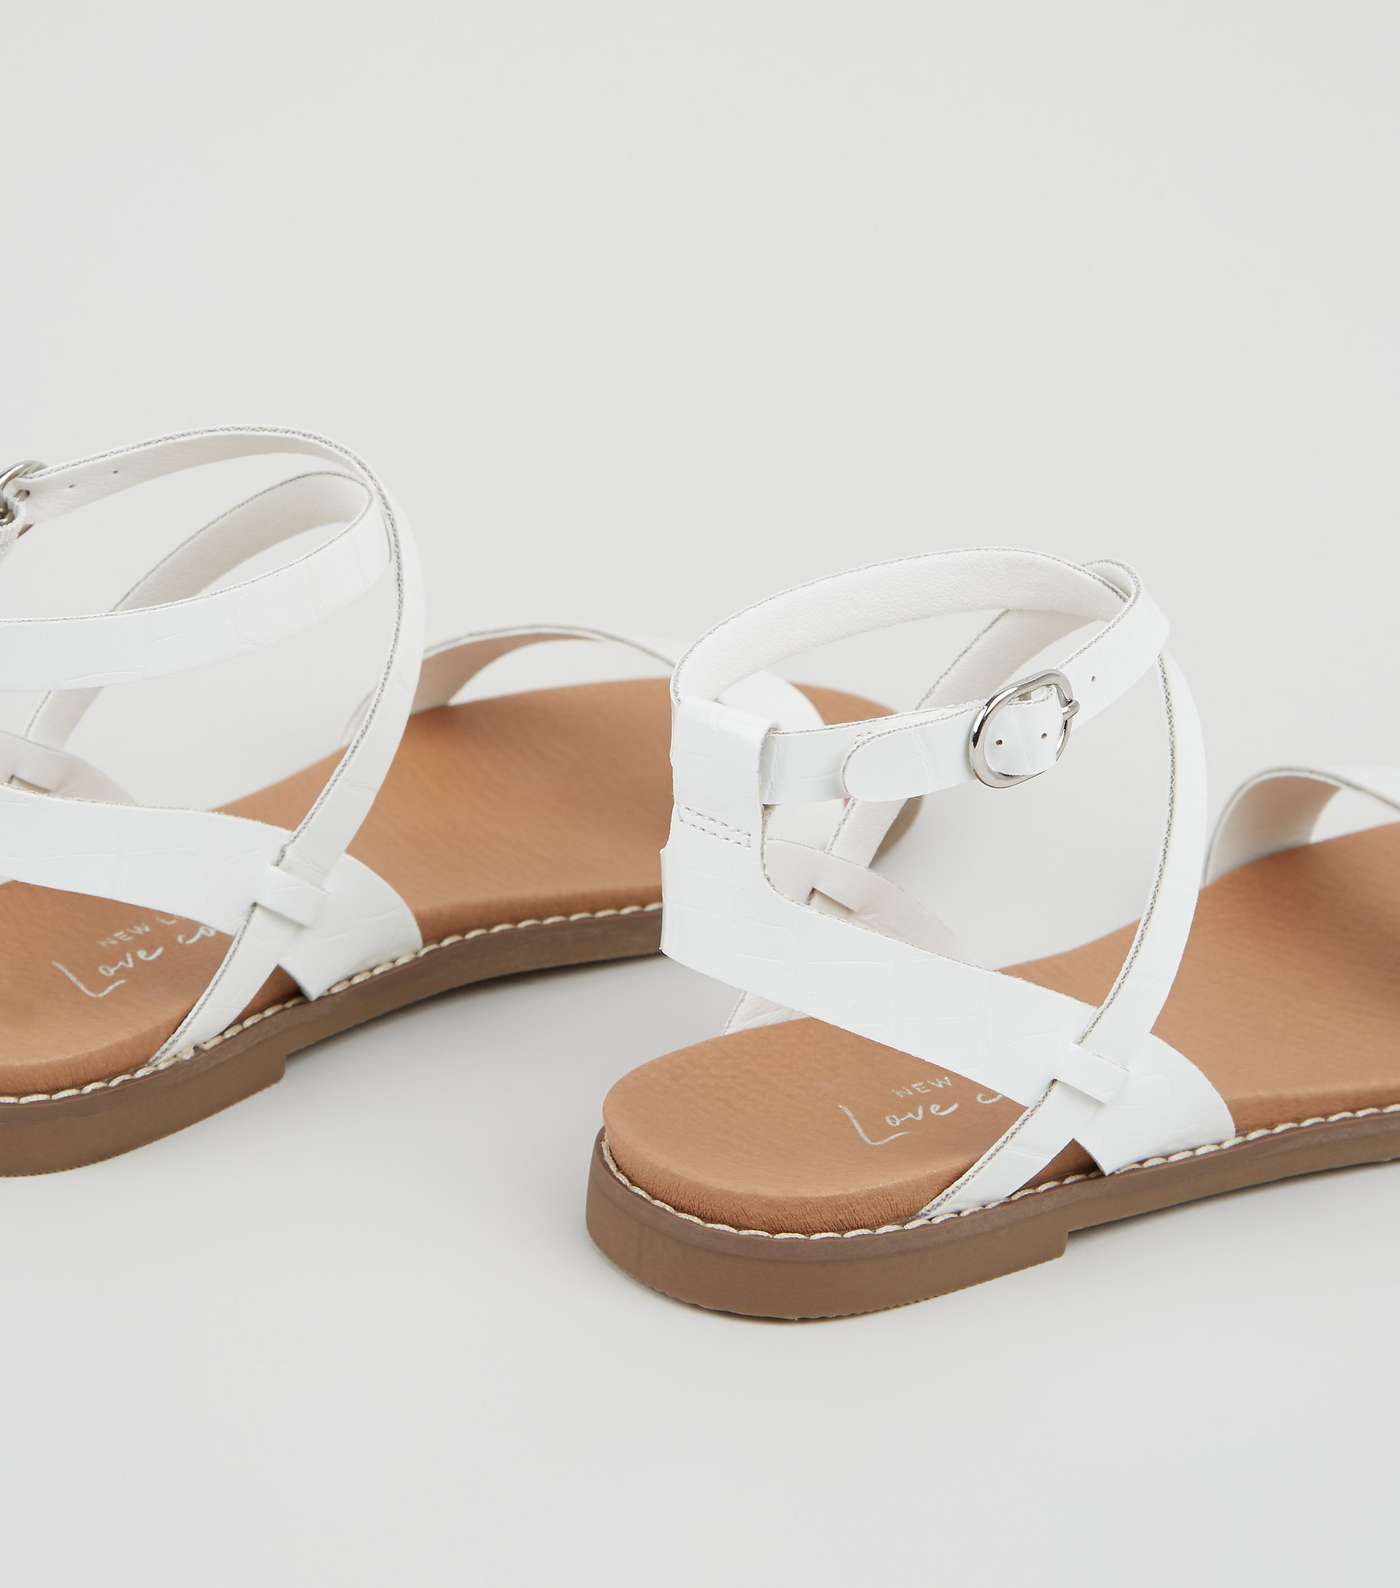 White Leather-Look Cross Strap Footbed Sandals Image 3